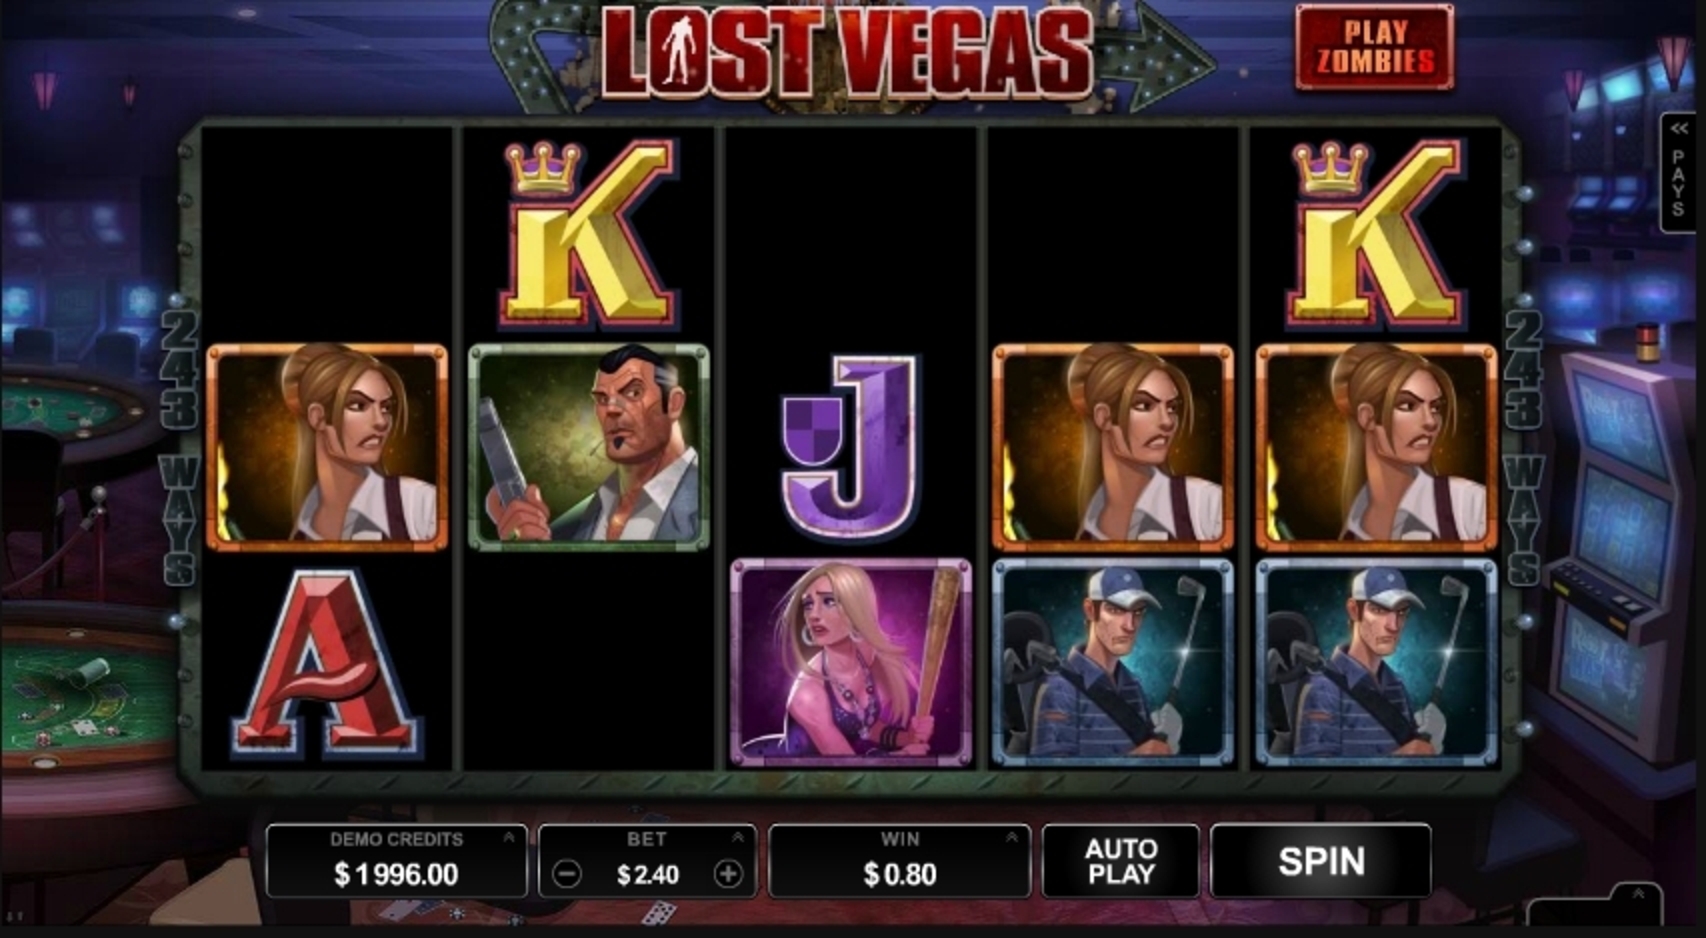 Win Money in Lost Vegas Free Slot Game by Microgaming